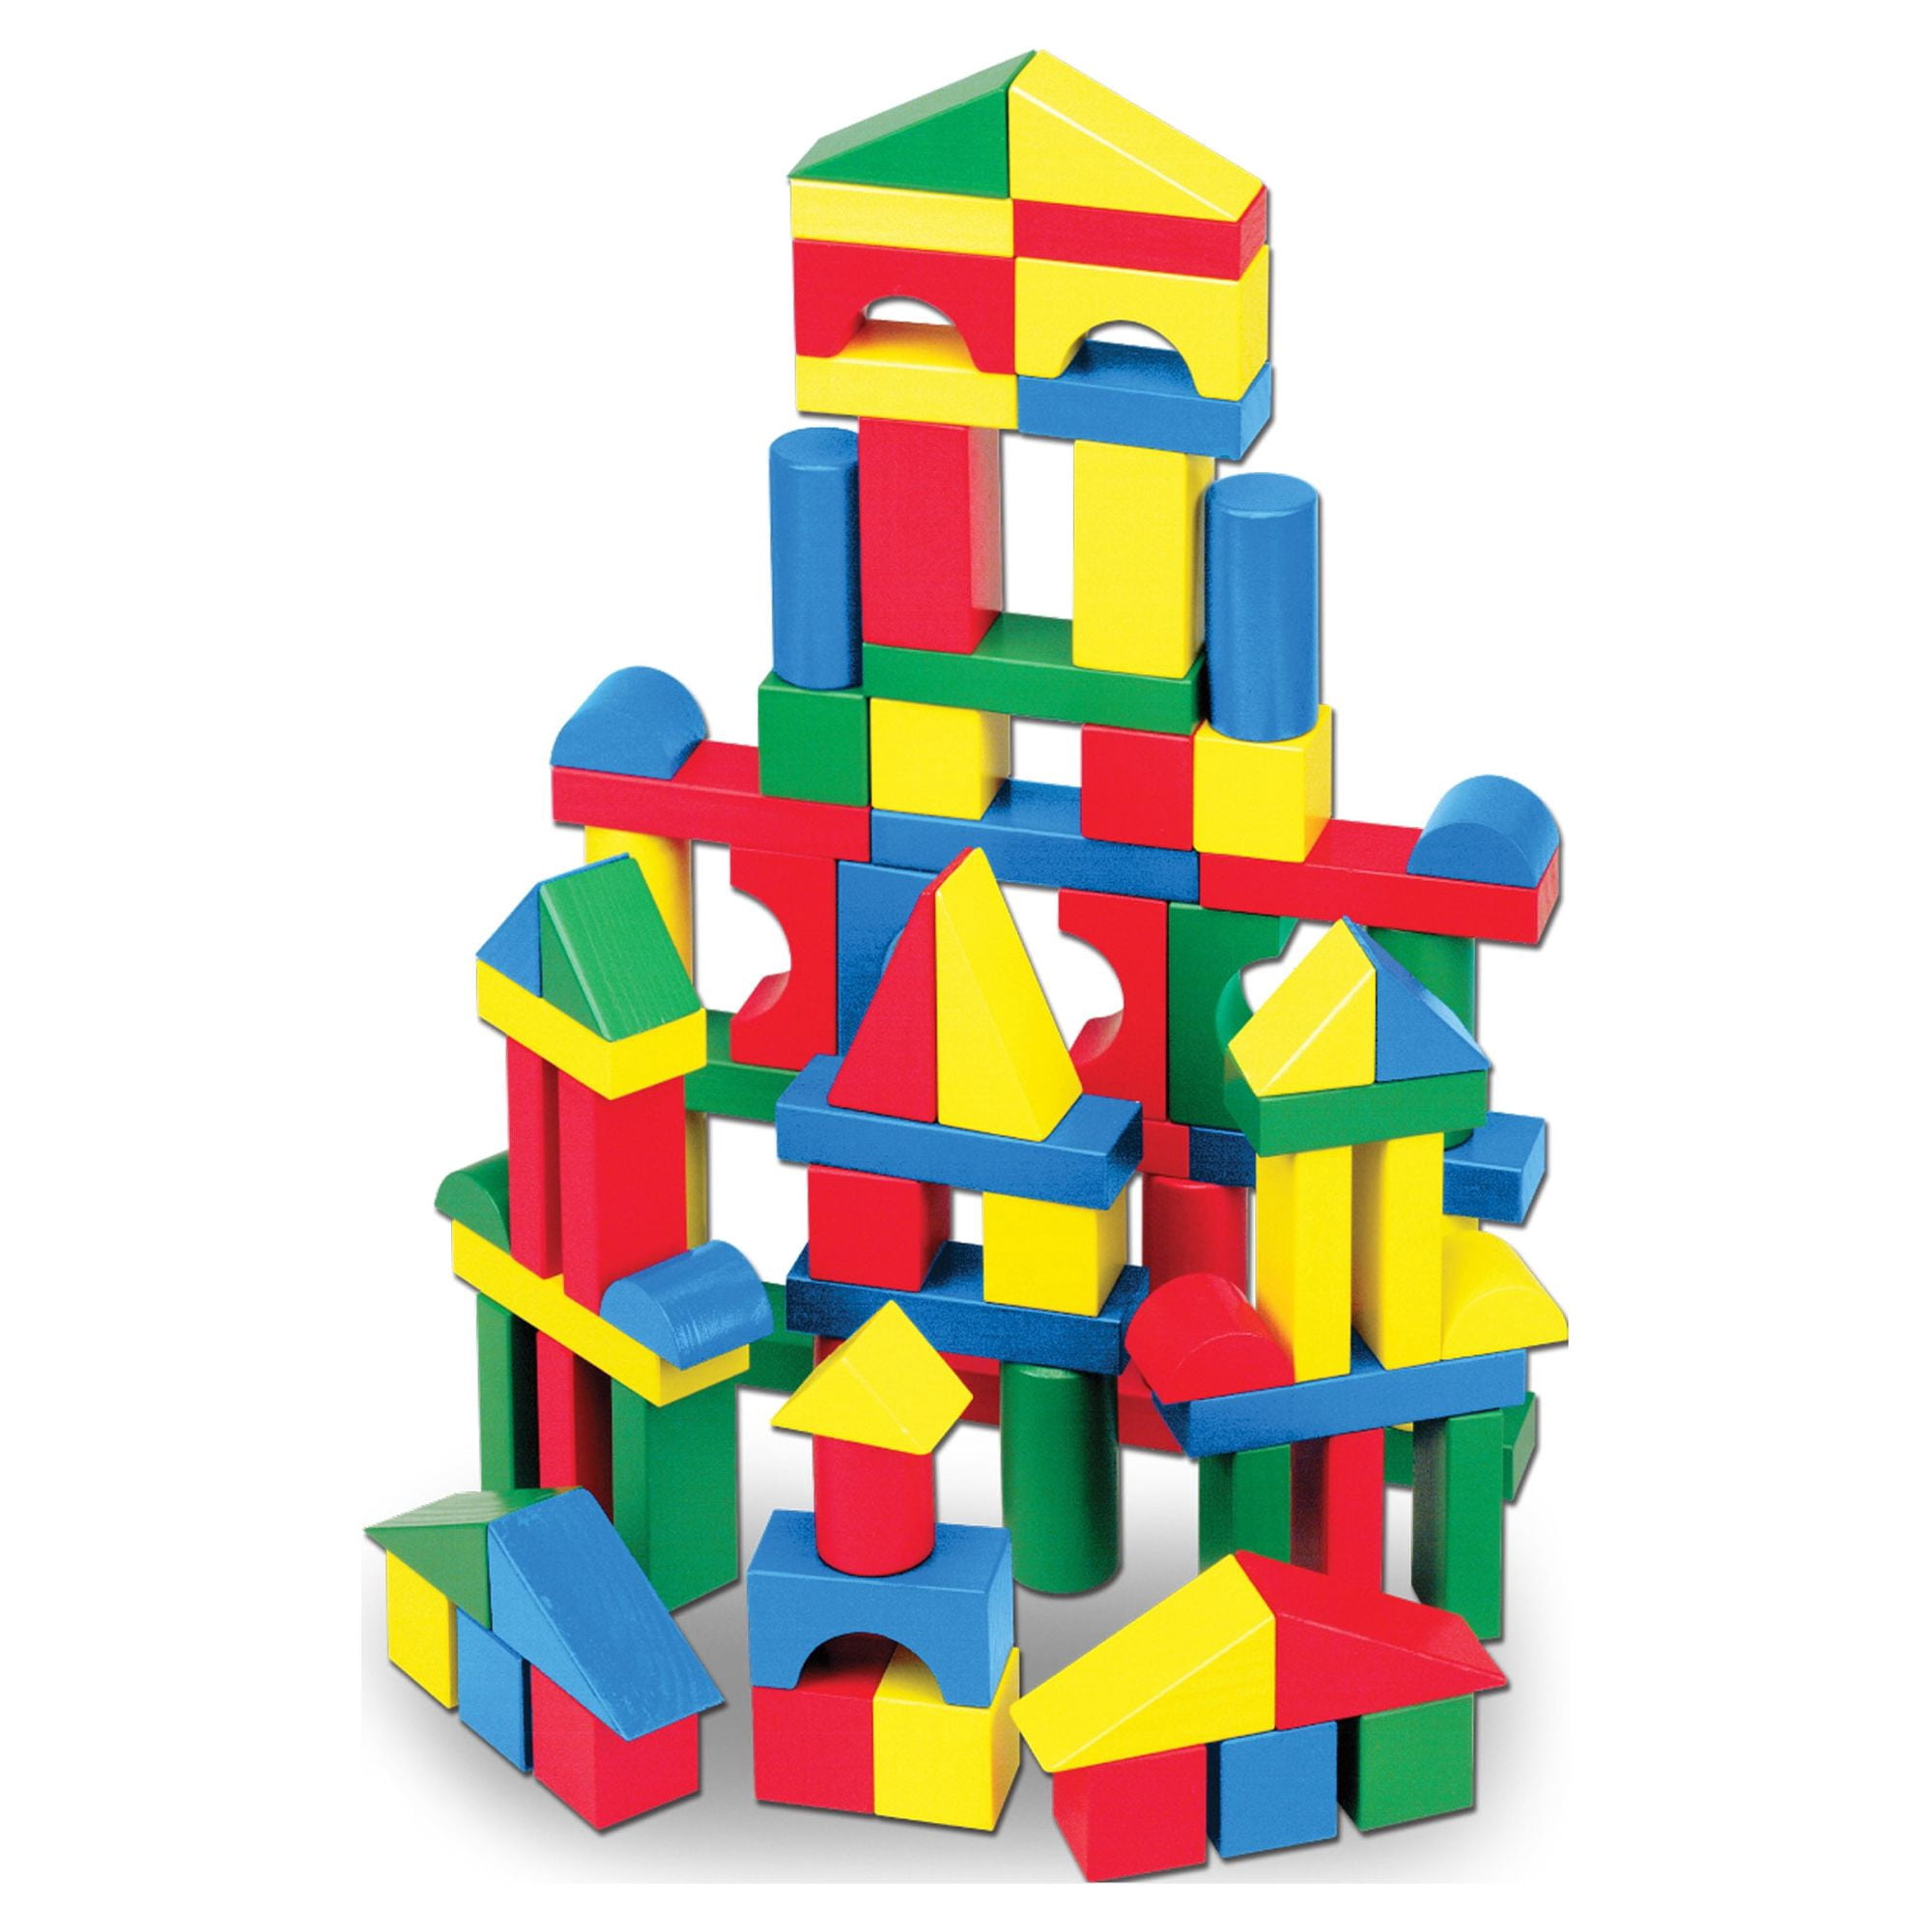 Melissa & Doug Wooden Building Blocks Set with 100 Blocks in 4 Colors and 9 Shapes